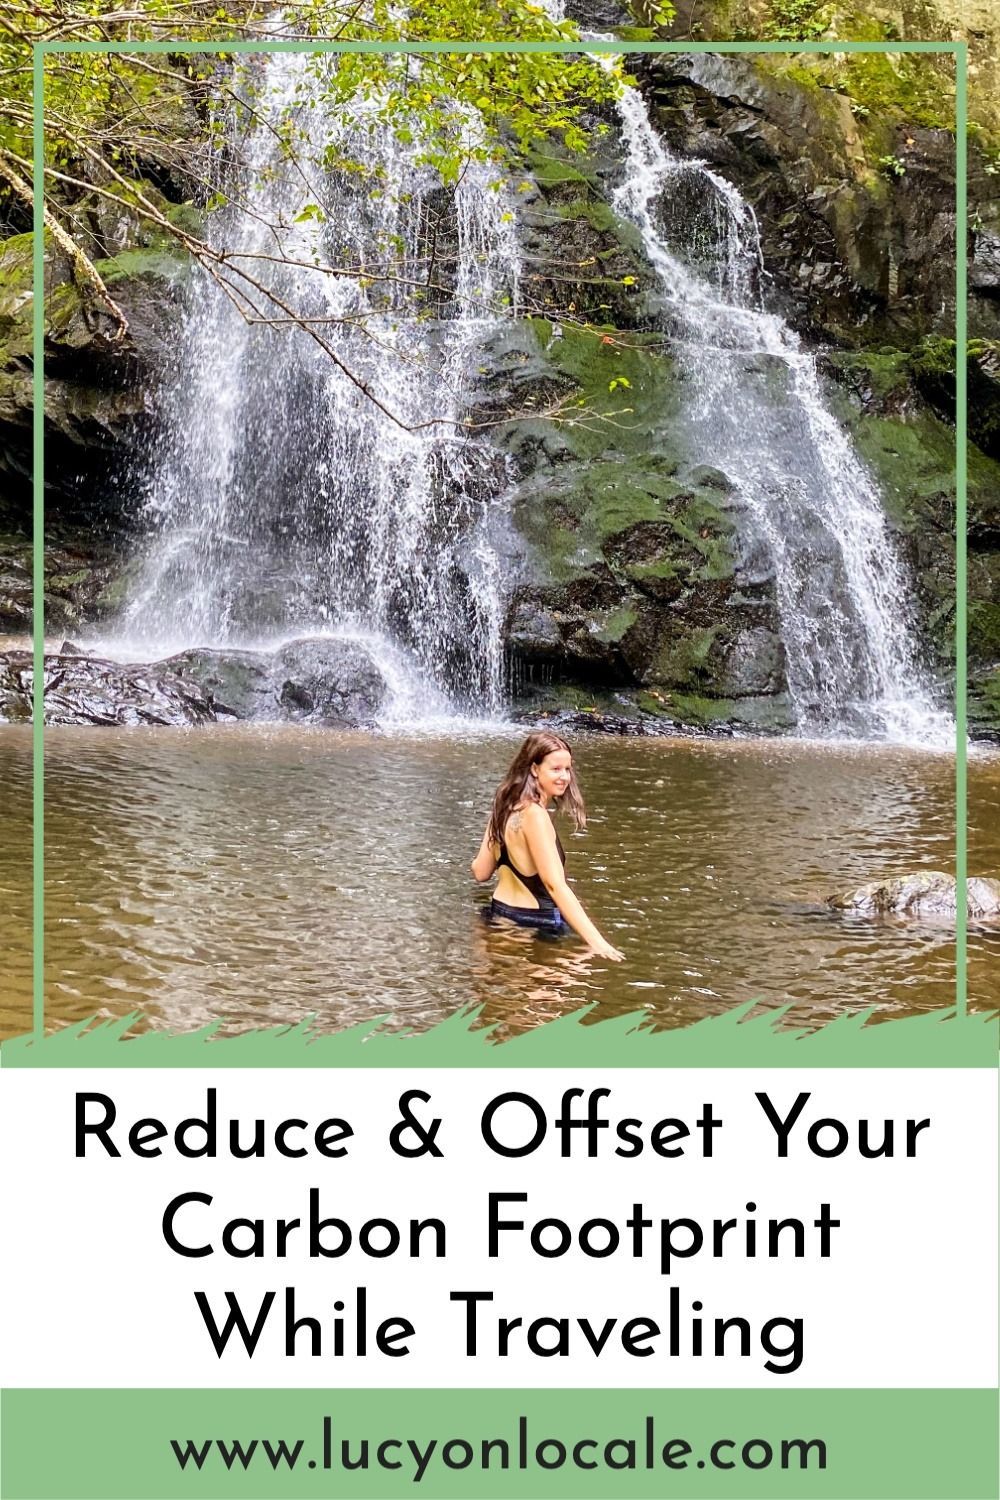 Ways to reduce and offset your carbon footprint while traveling